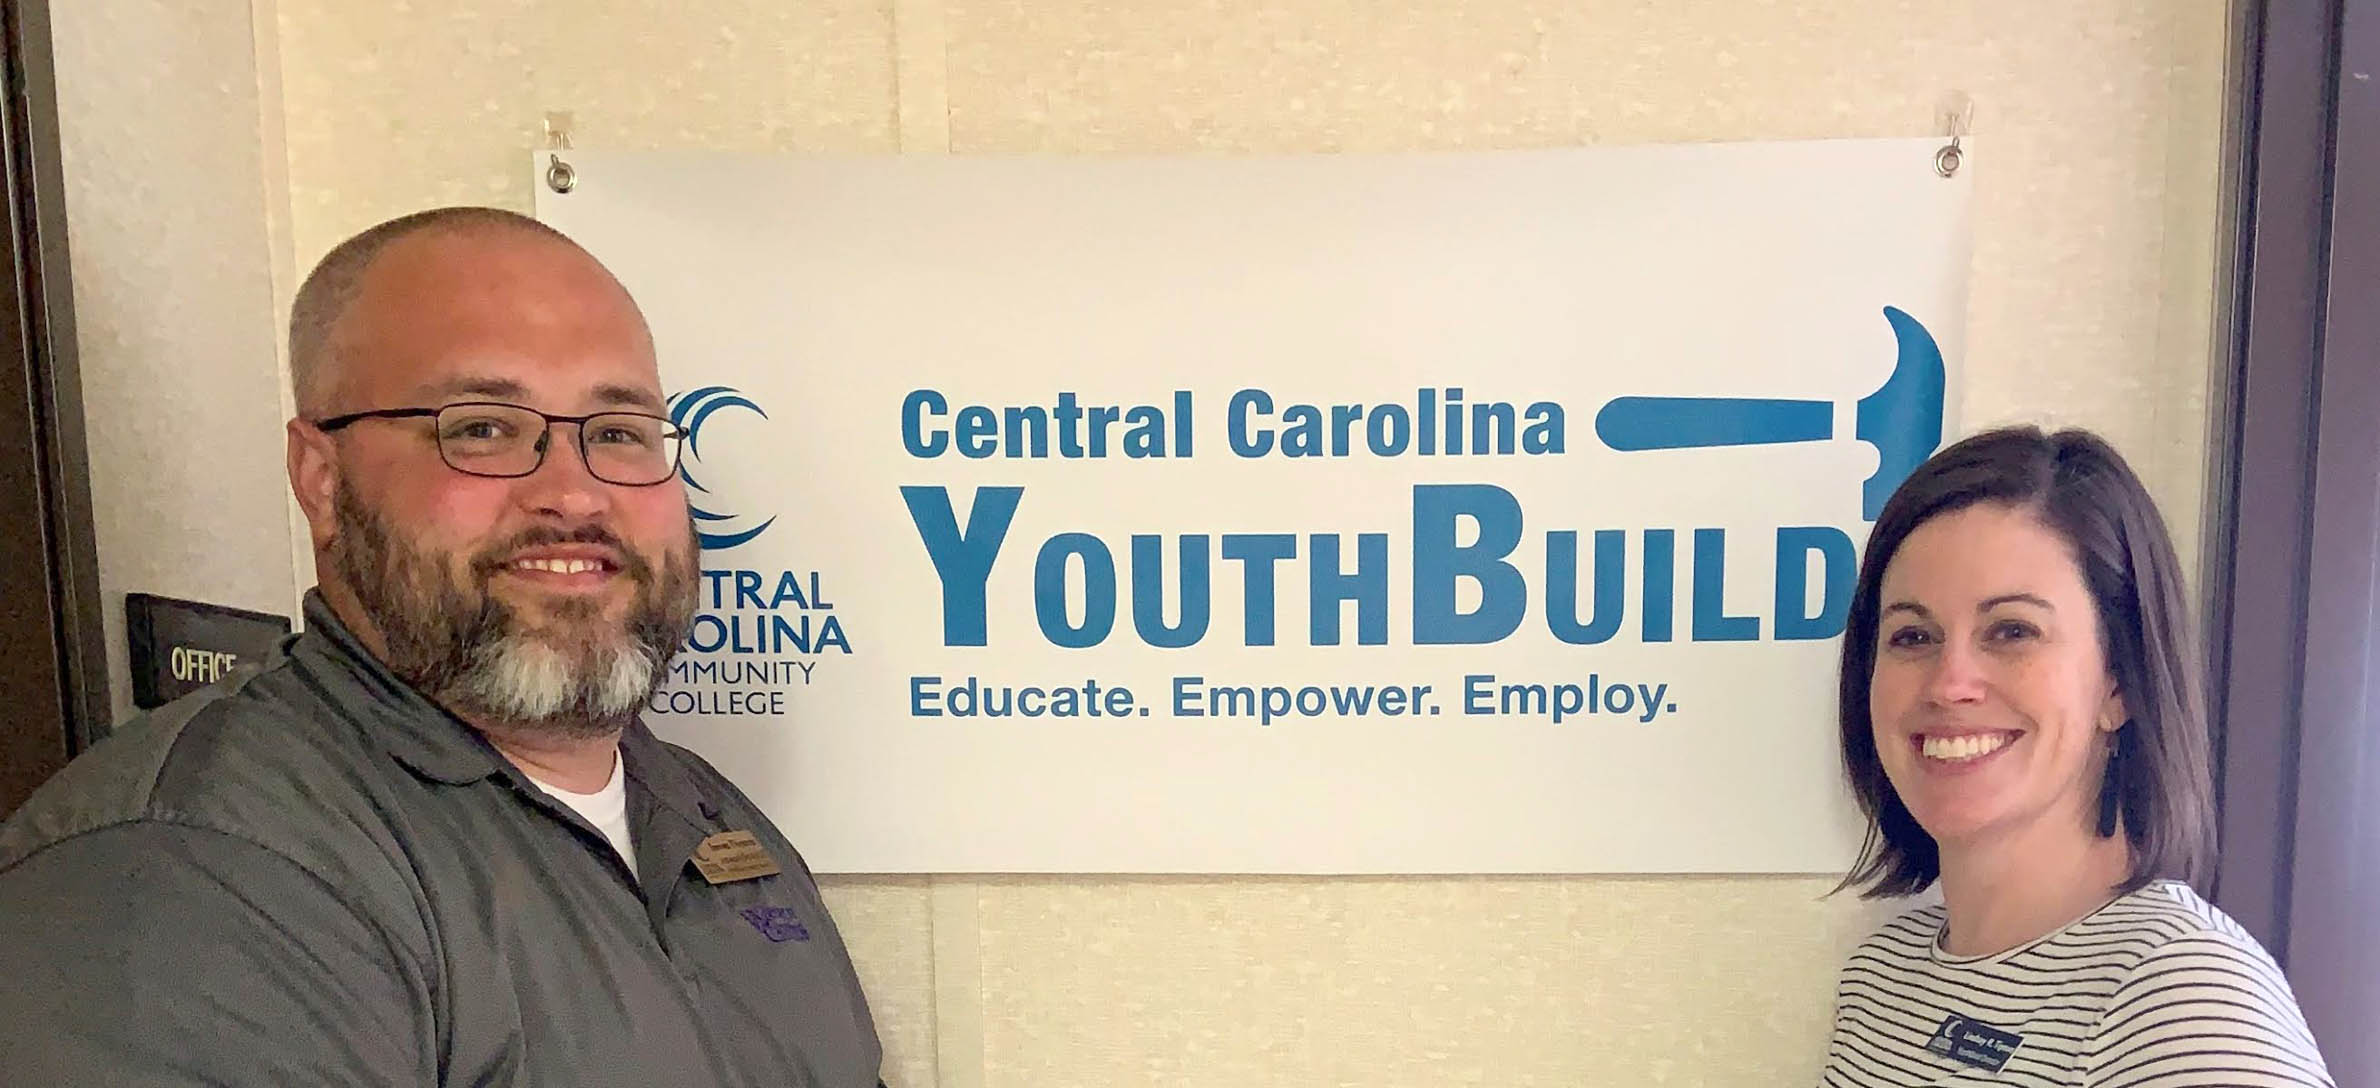 CCCC receives grant to continue YouthBuild Program